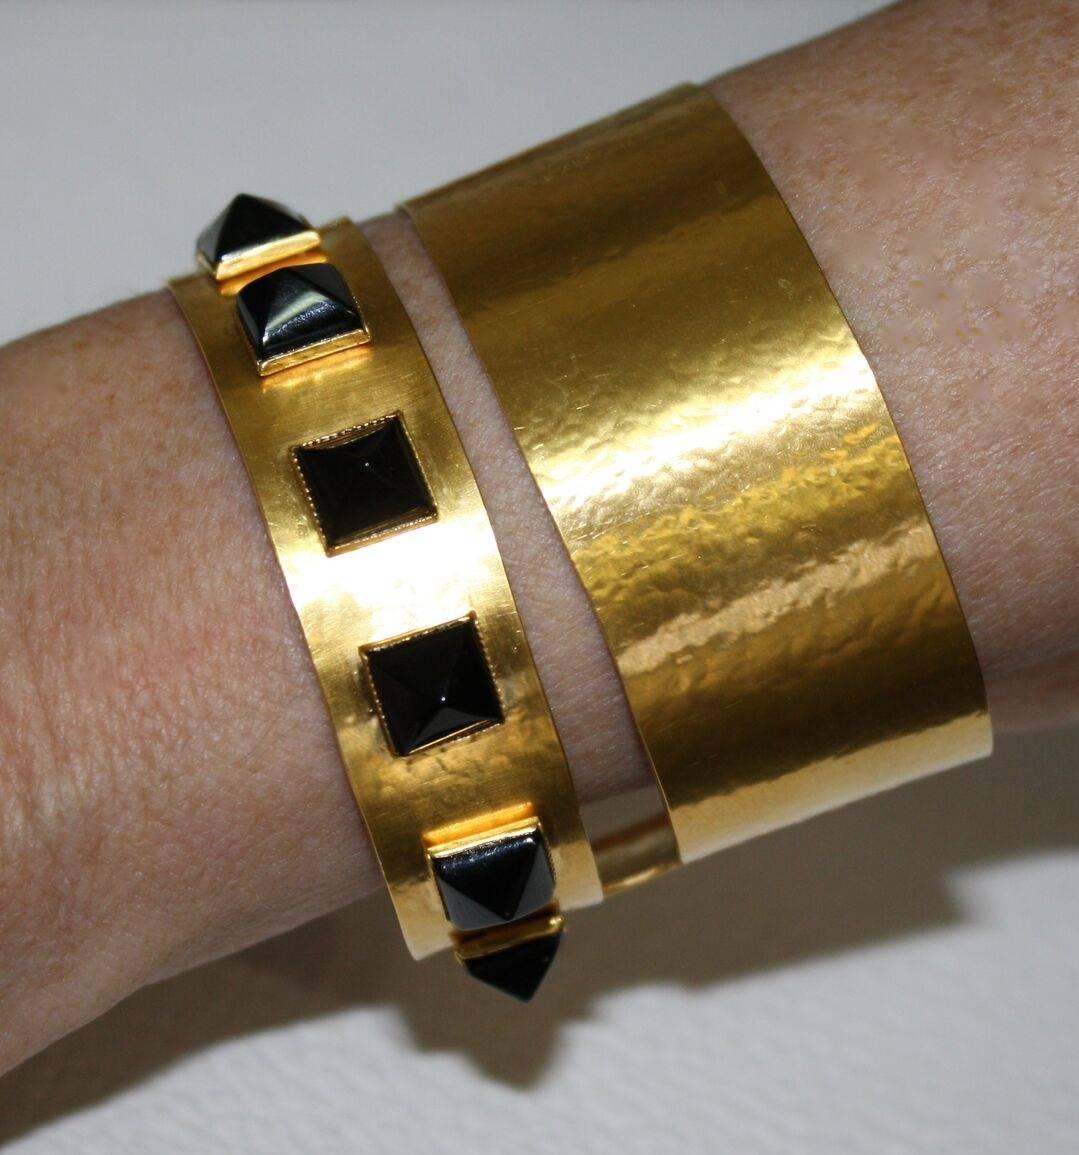 Gilded brass cuff bracelet with black onyx studs from Herve van der Straeten.

Cuff is very soft and can be molded to fit any wrist. 

Hervé Van der Straeten was born in 1965 and is an independent artist-designer. Having first become known for